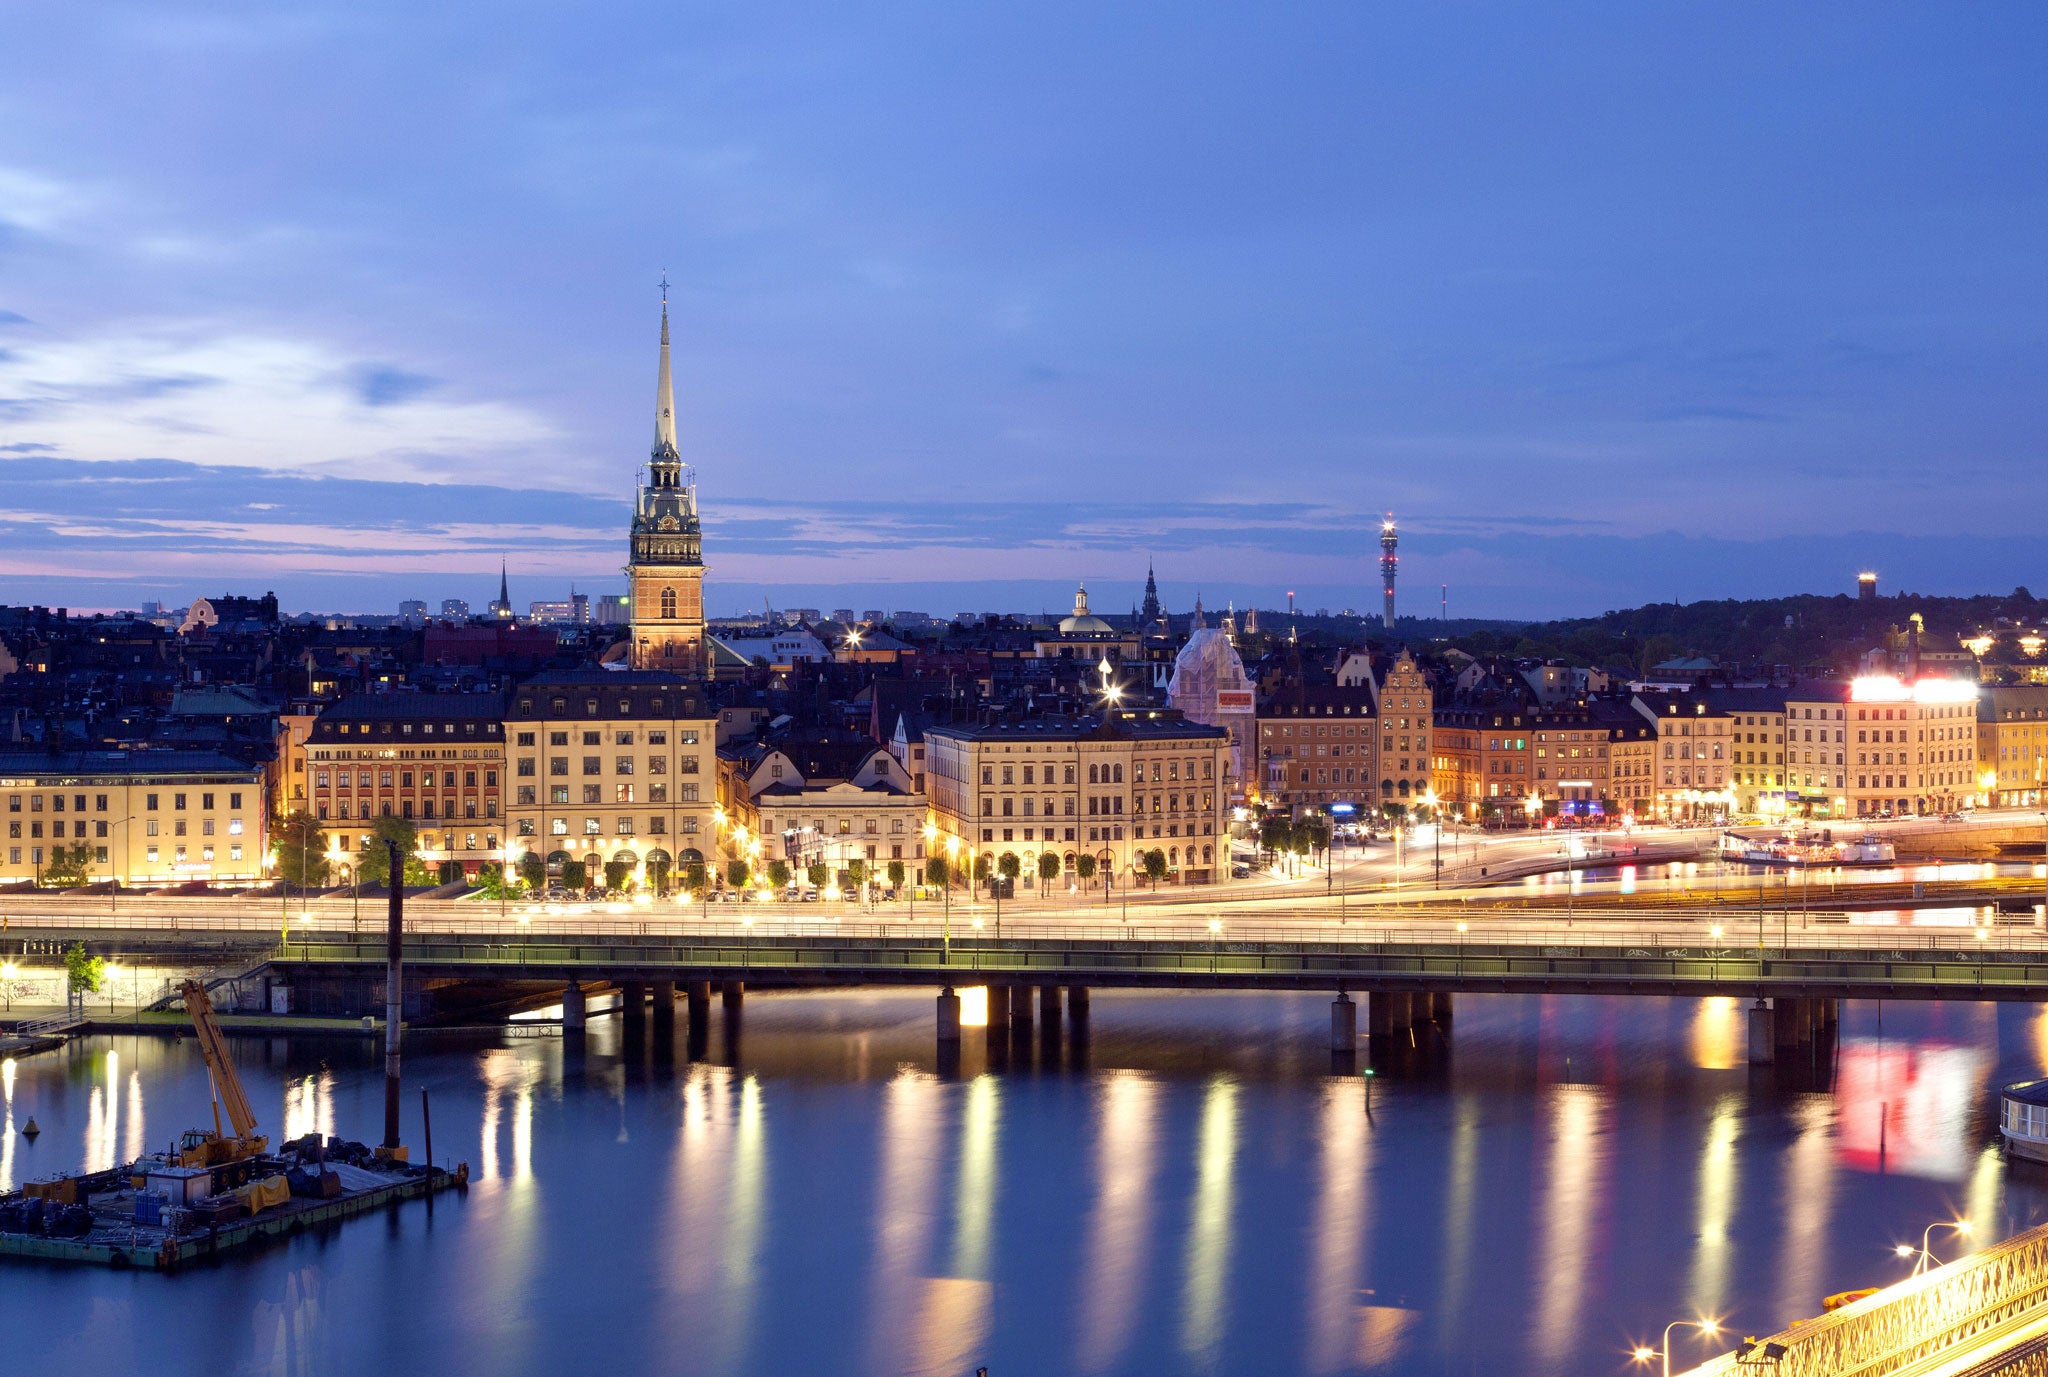 Stockholm is punching above its weight when it come to so-called 'unicorn' businesses